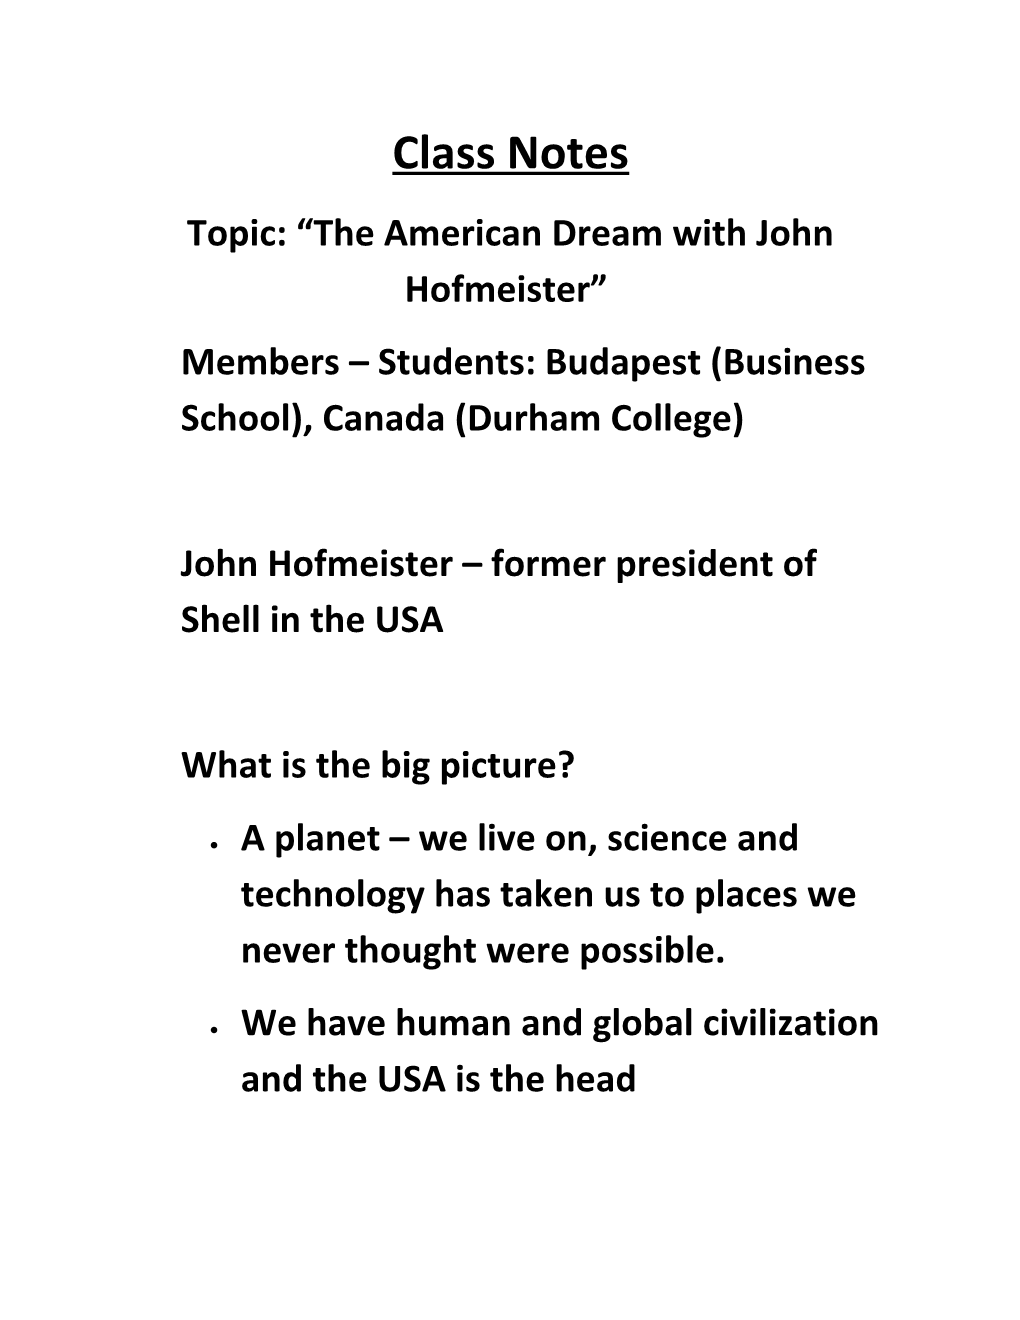 Topic: the American Dream with John Hofmeister